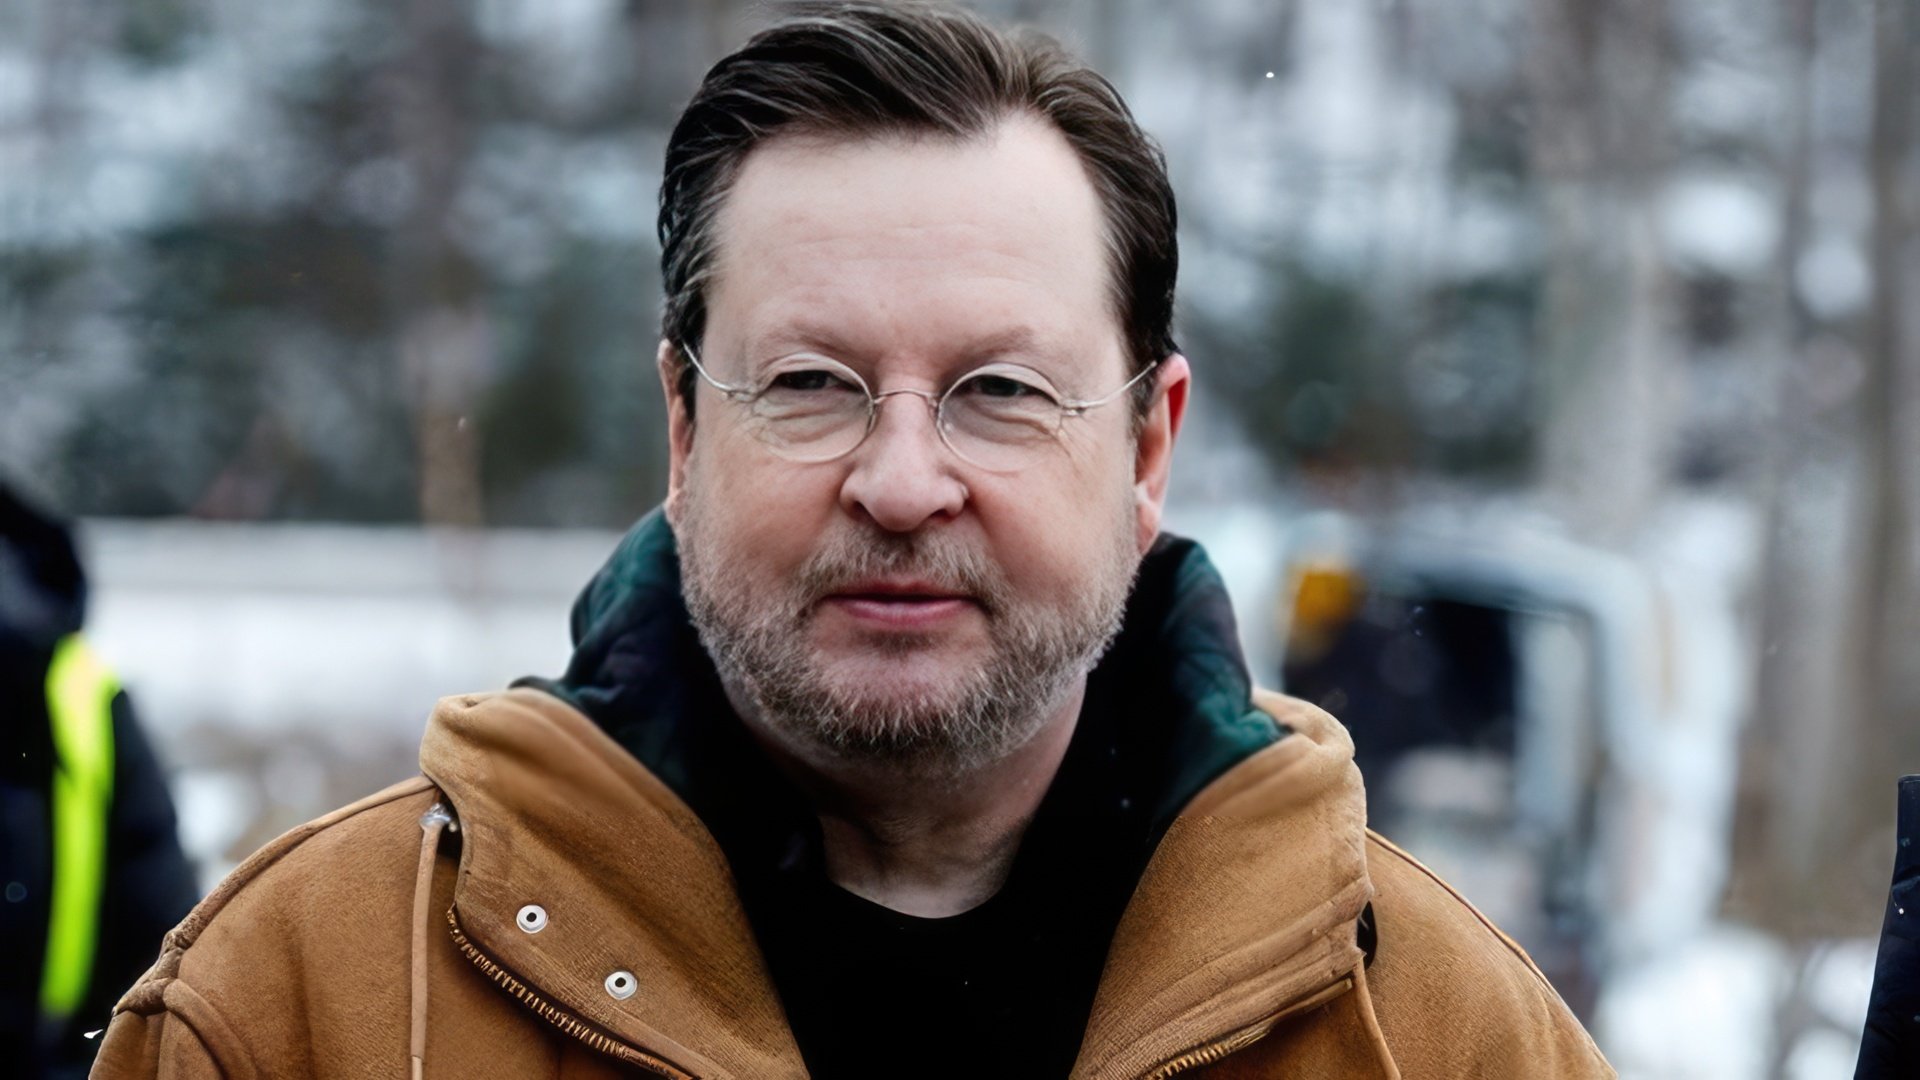 In His Interview, Lars von Trier Says That He Often Feels Depressed